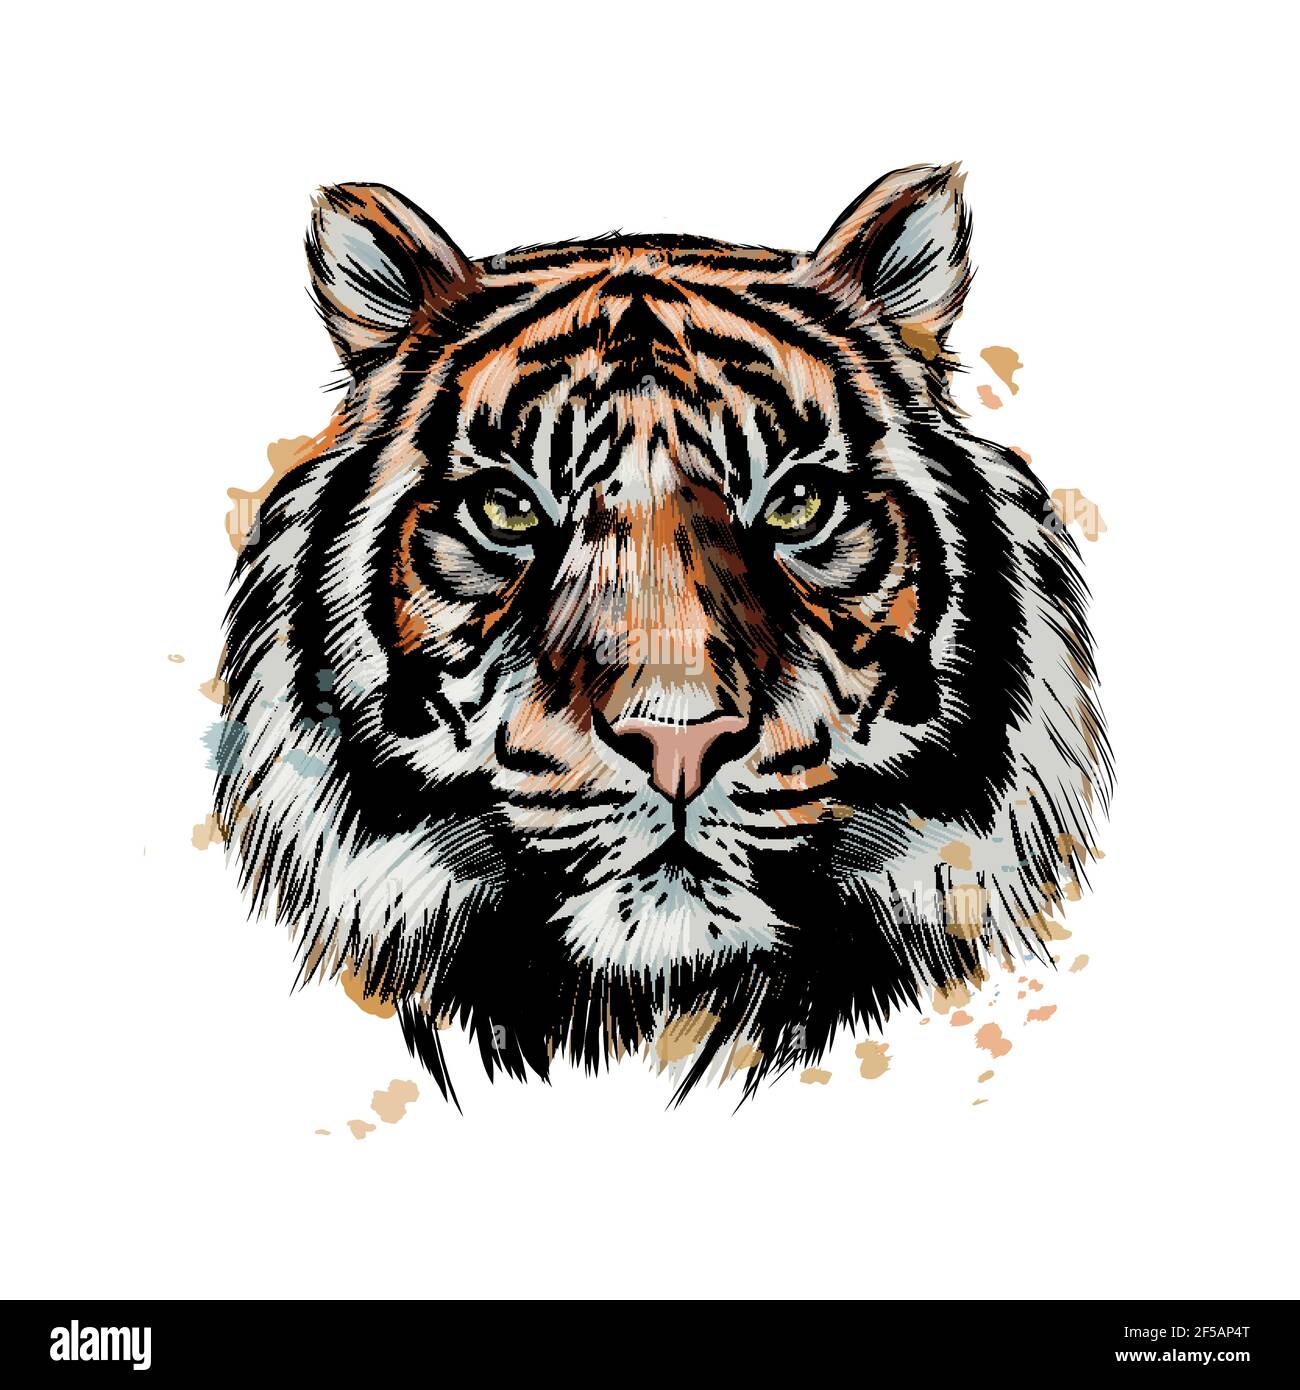 3D (The Canvas Arts) Temporary Tattoo Waterproof For Men Women Arm Hand (Angry  Tiger Tattoo) Size 21X15 cm : Amazon.in: Beauty